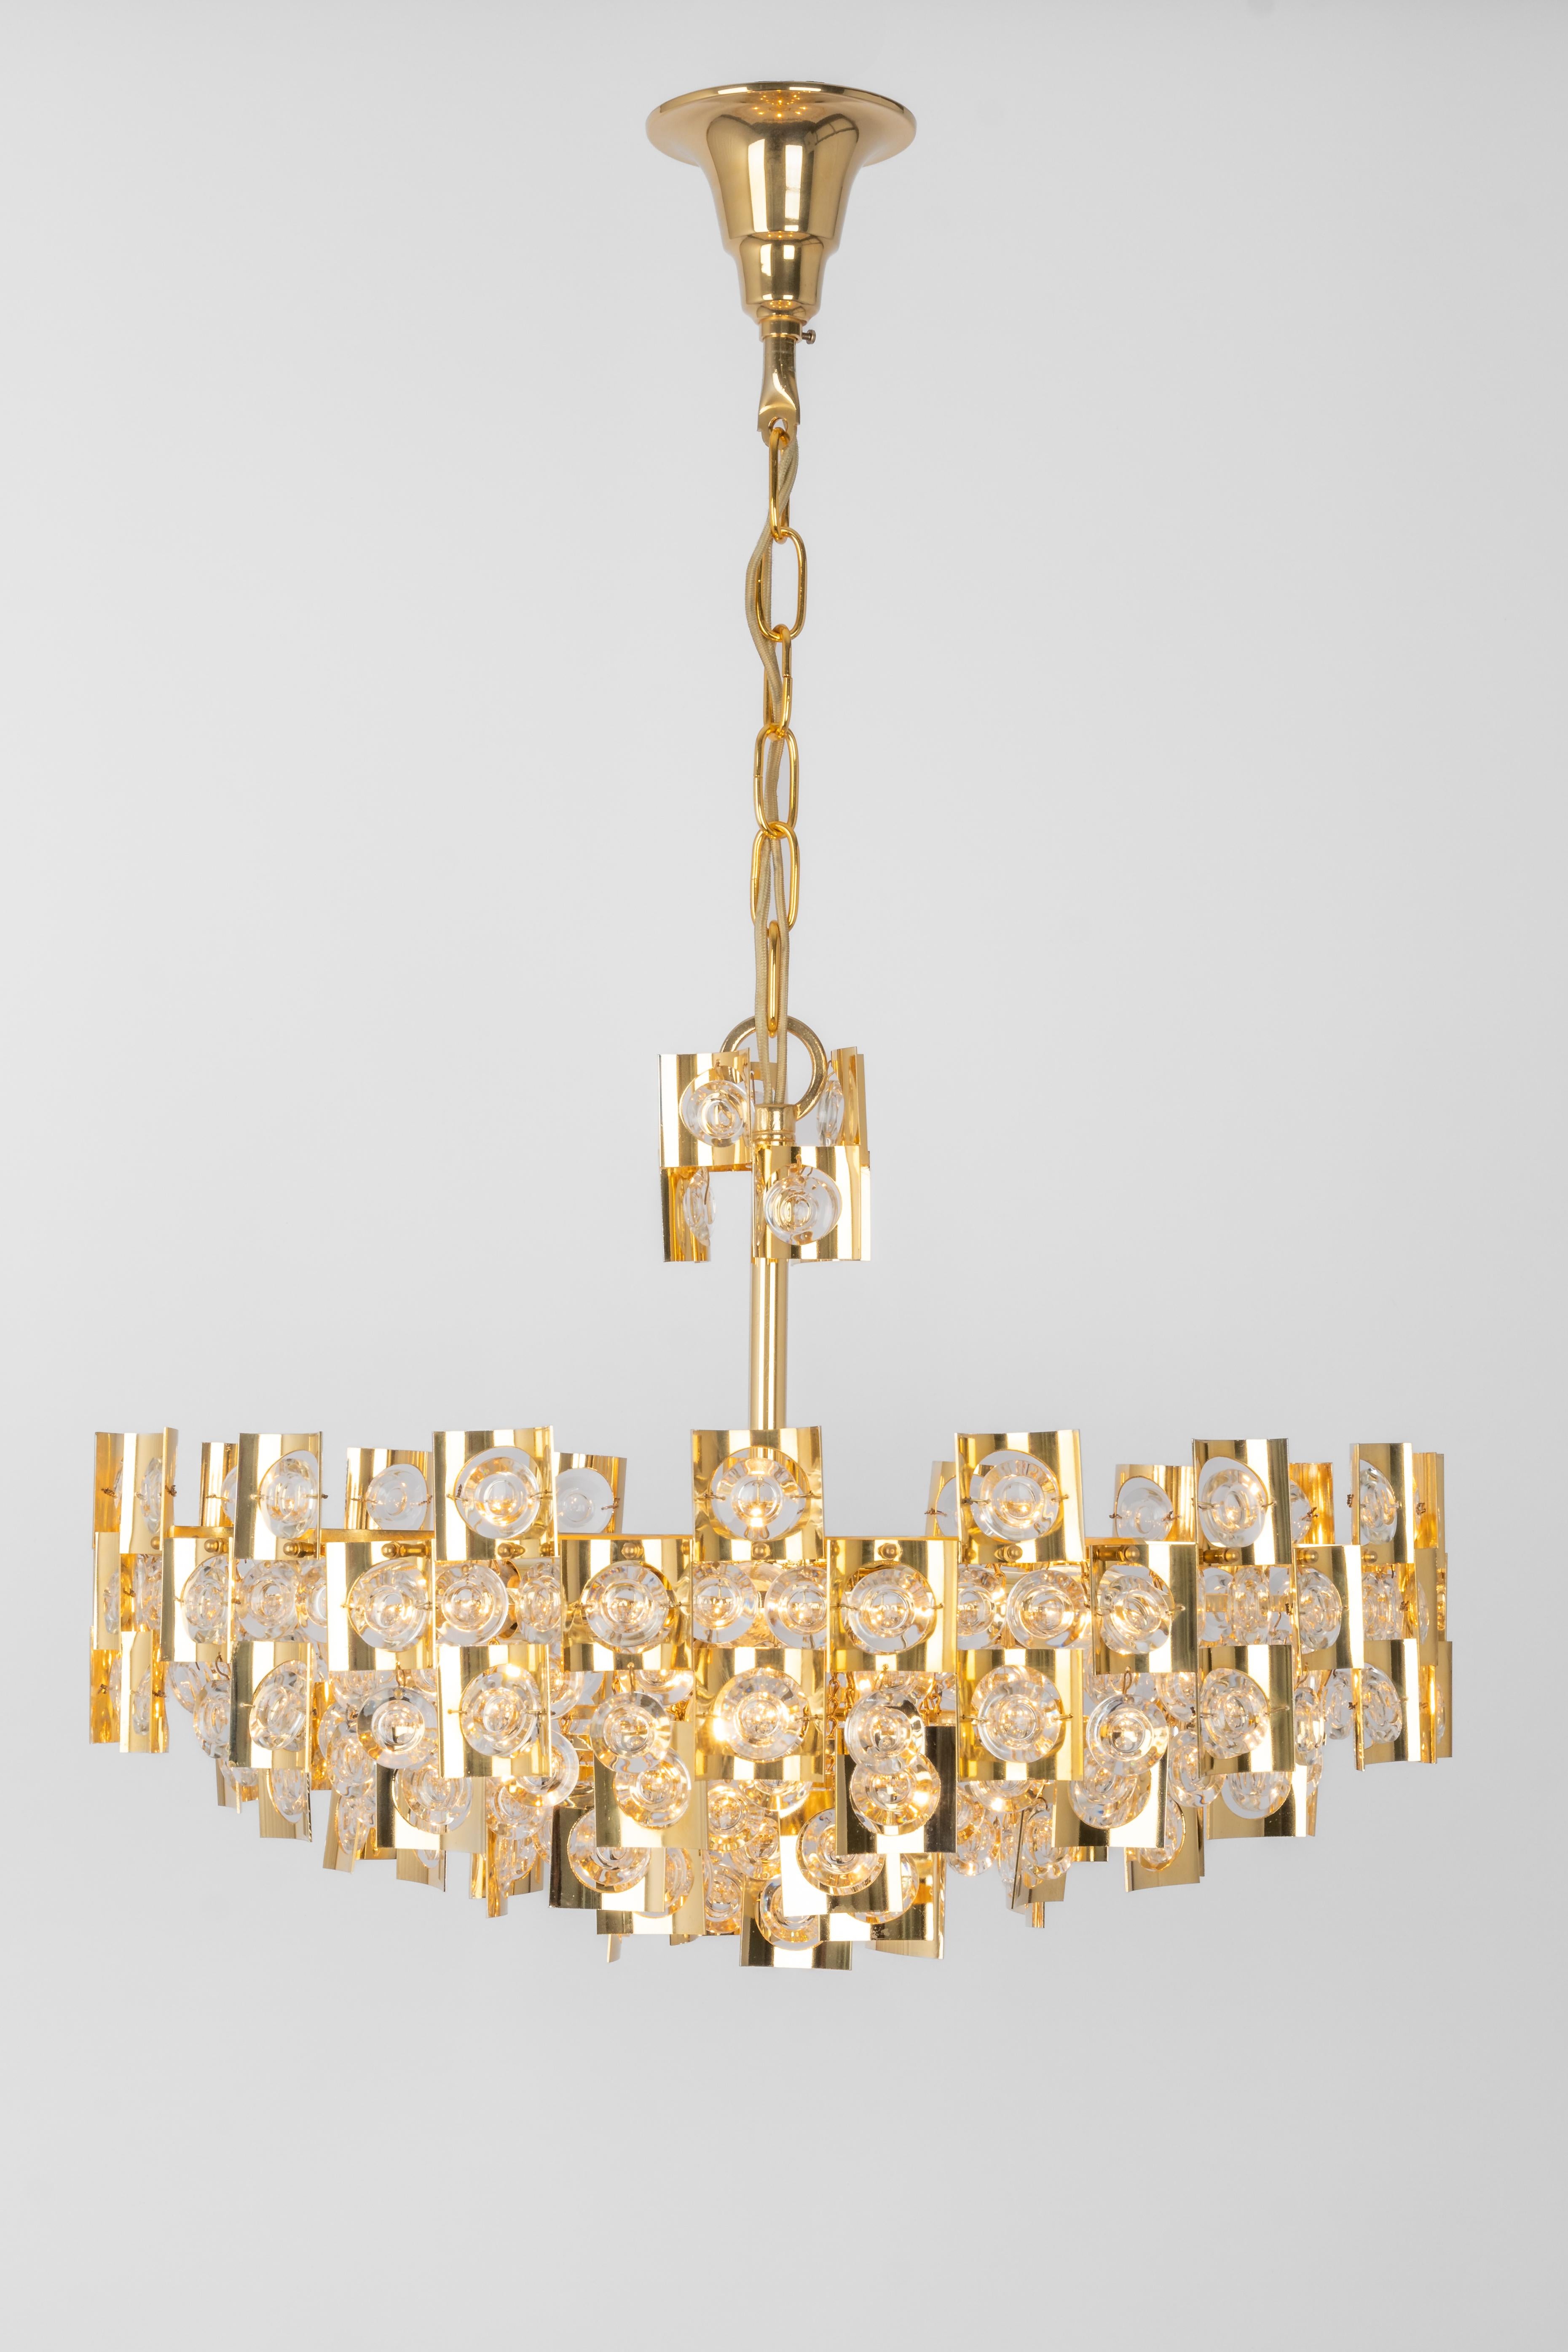 Impressive Large Gilt Brass and Crystal Glass Chandelier by Palwa Germany, 1960s For Sale 2